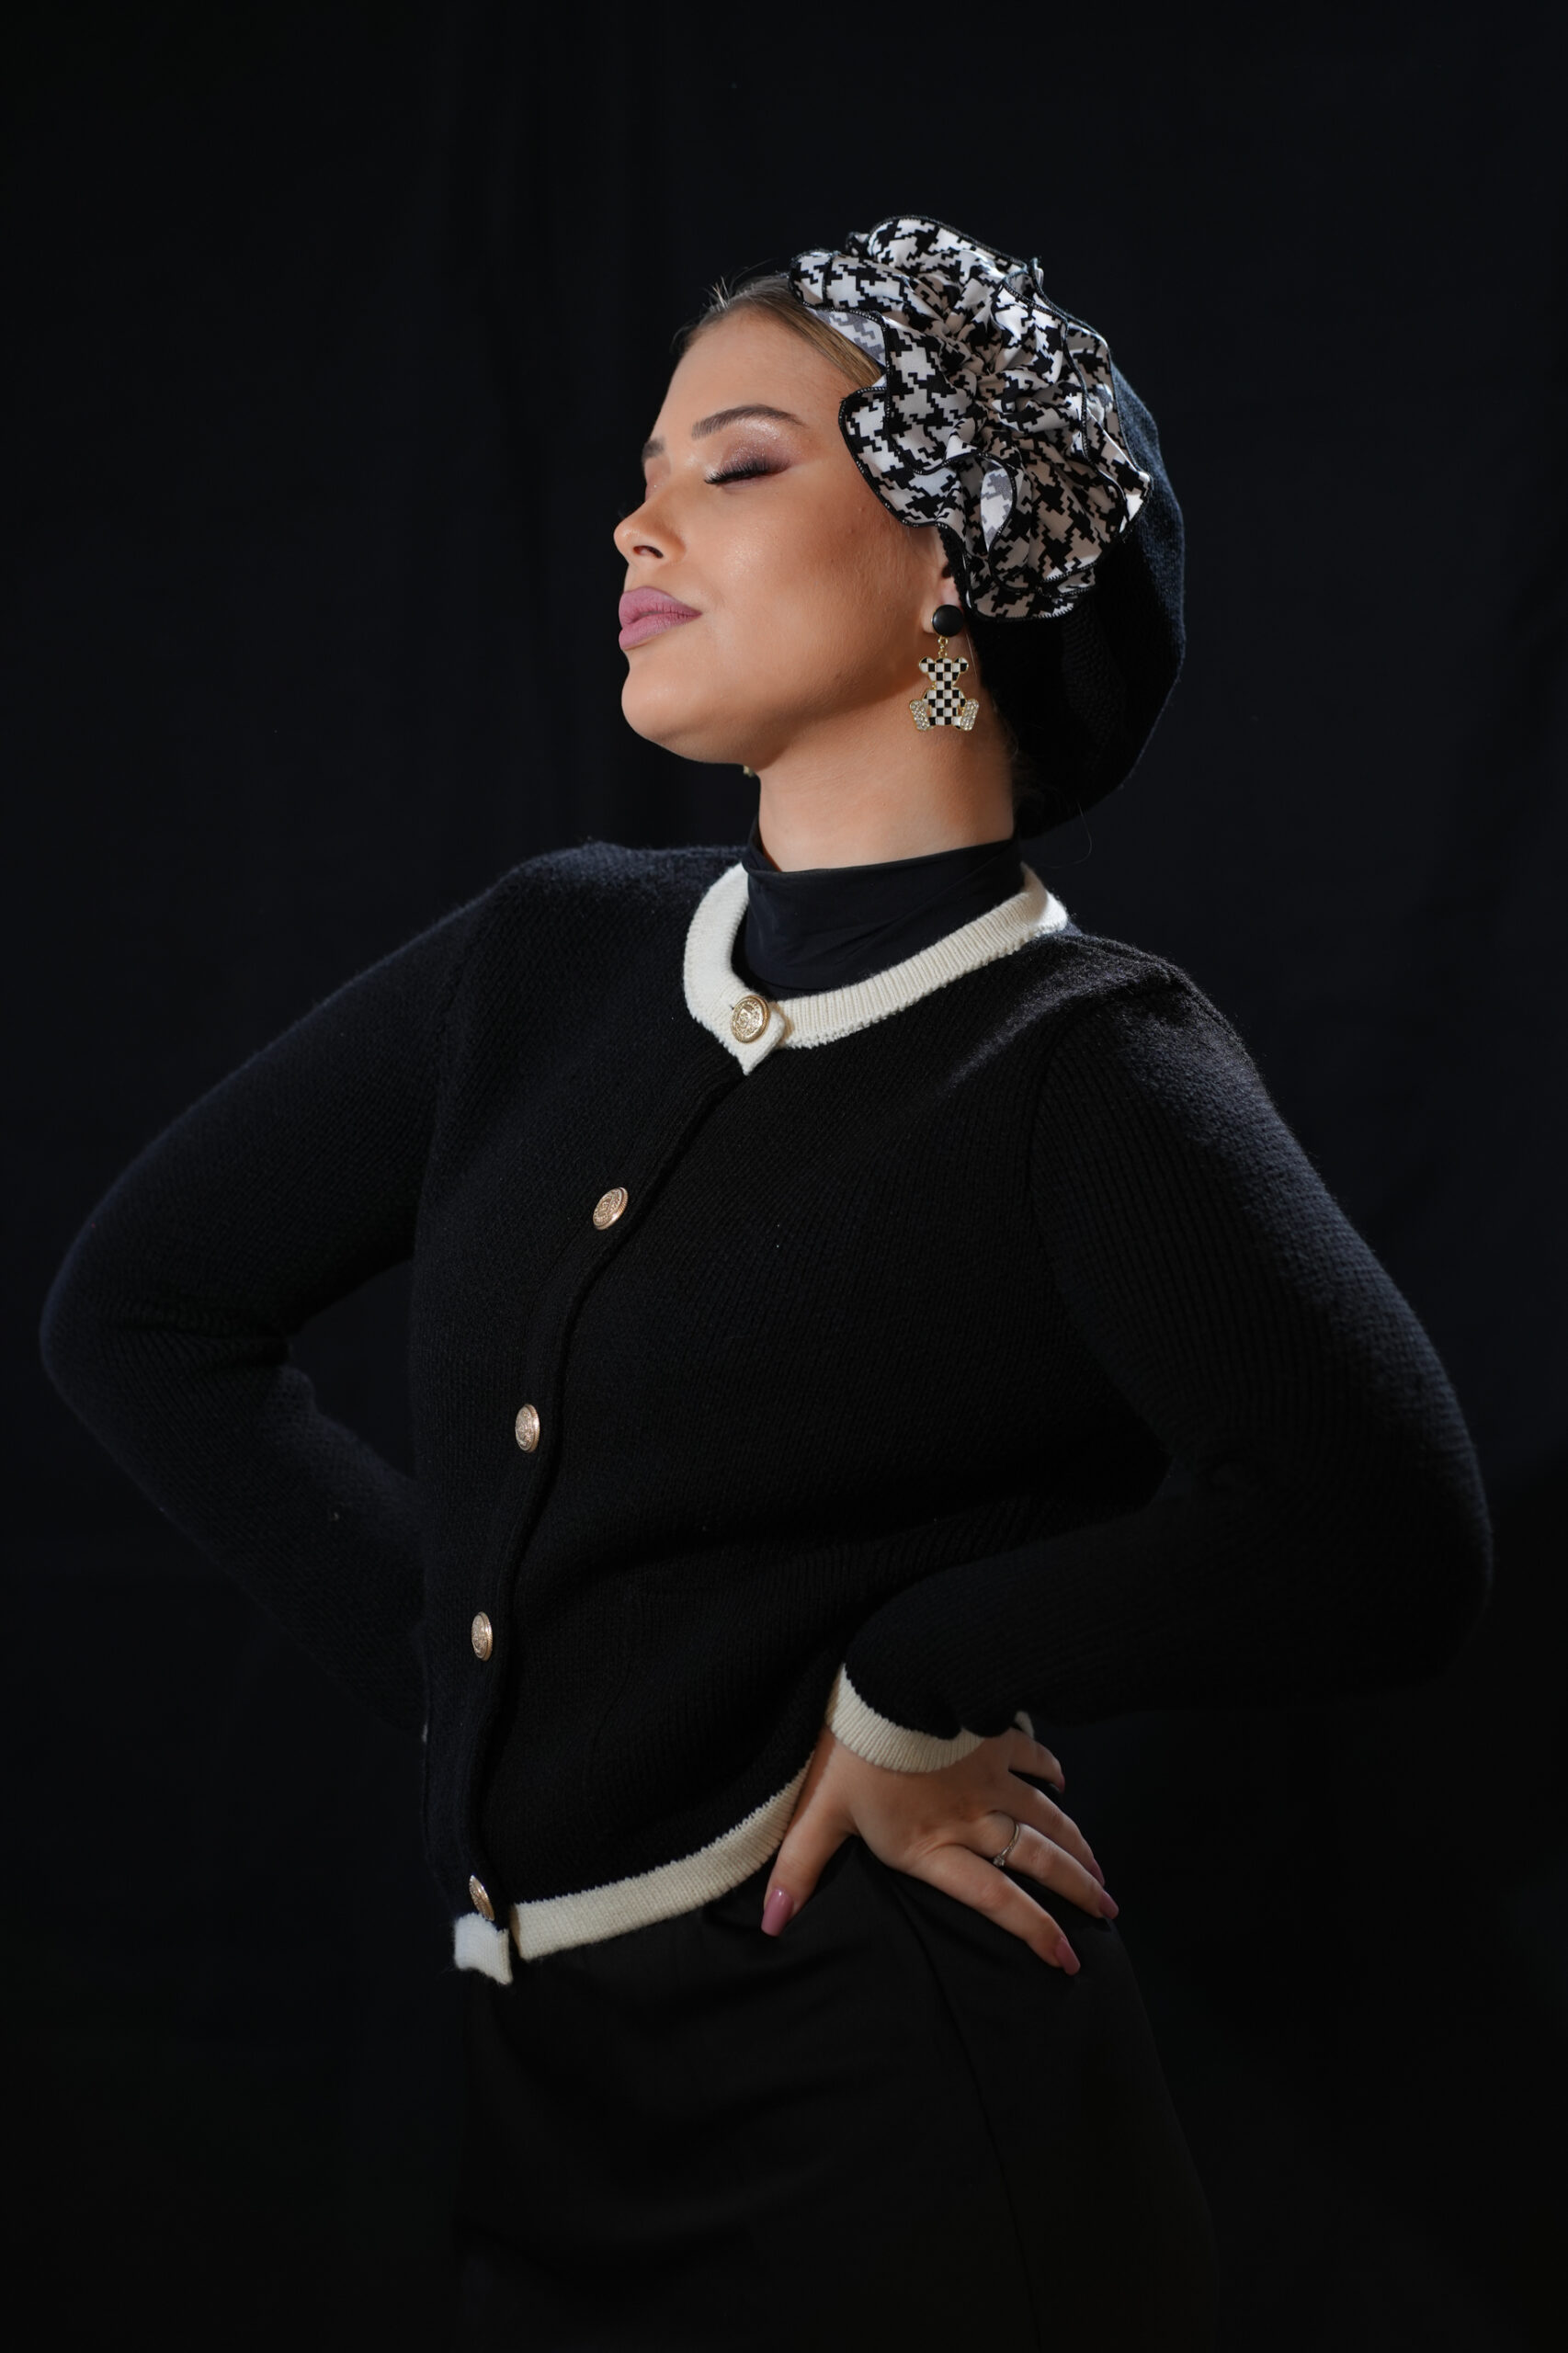 Black Beret with Black and White Flower